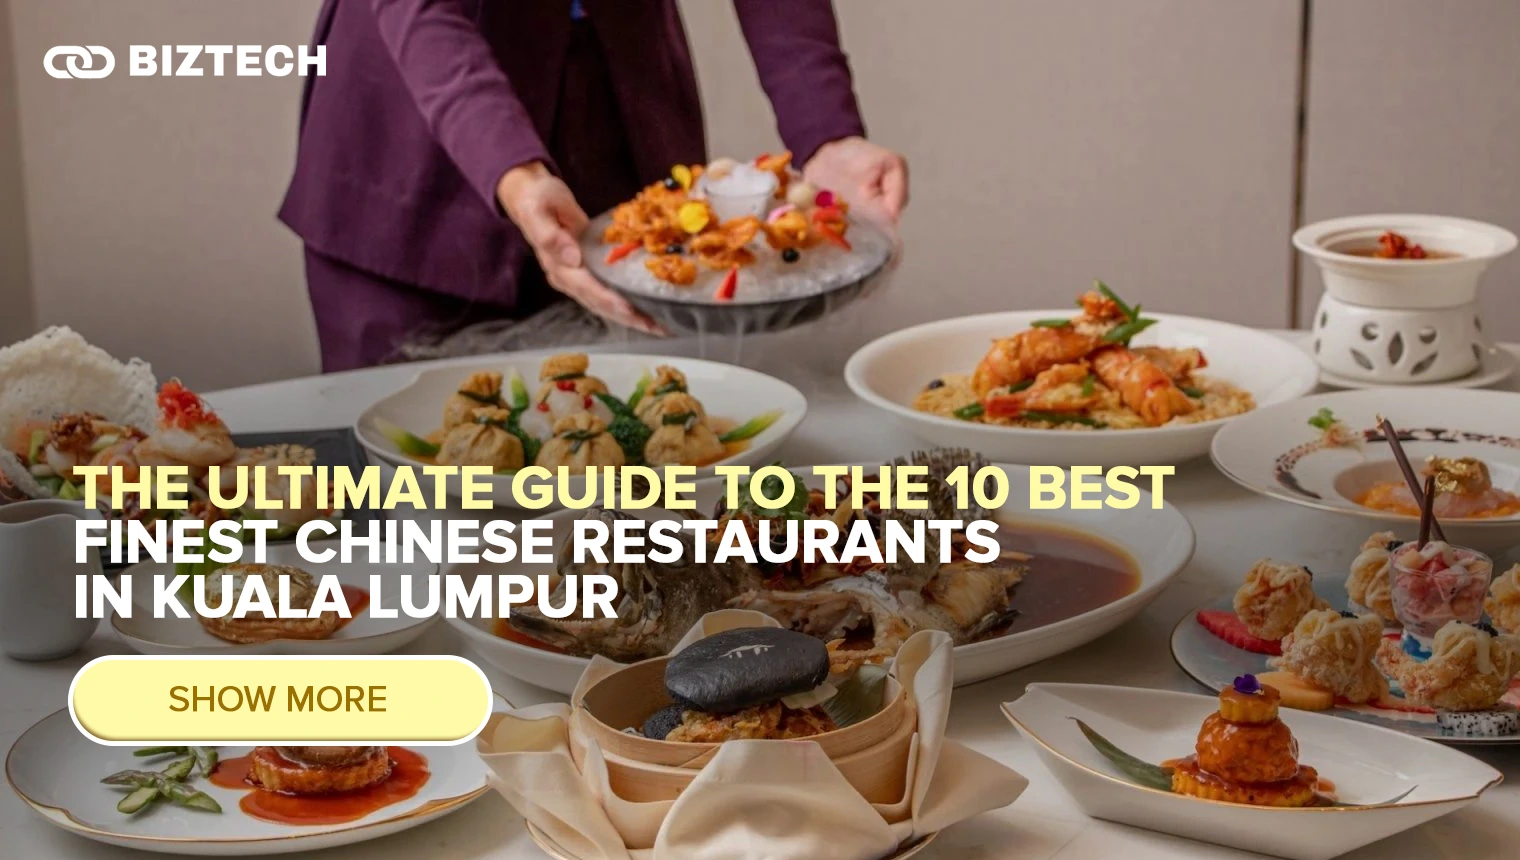 The Ultimate Guide to the 10 Best Finest Chinese Restaurants in Kuala Lumpur